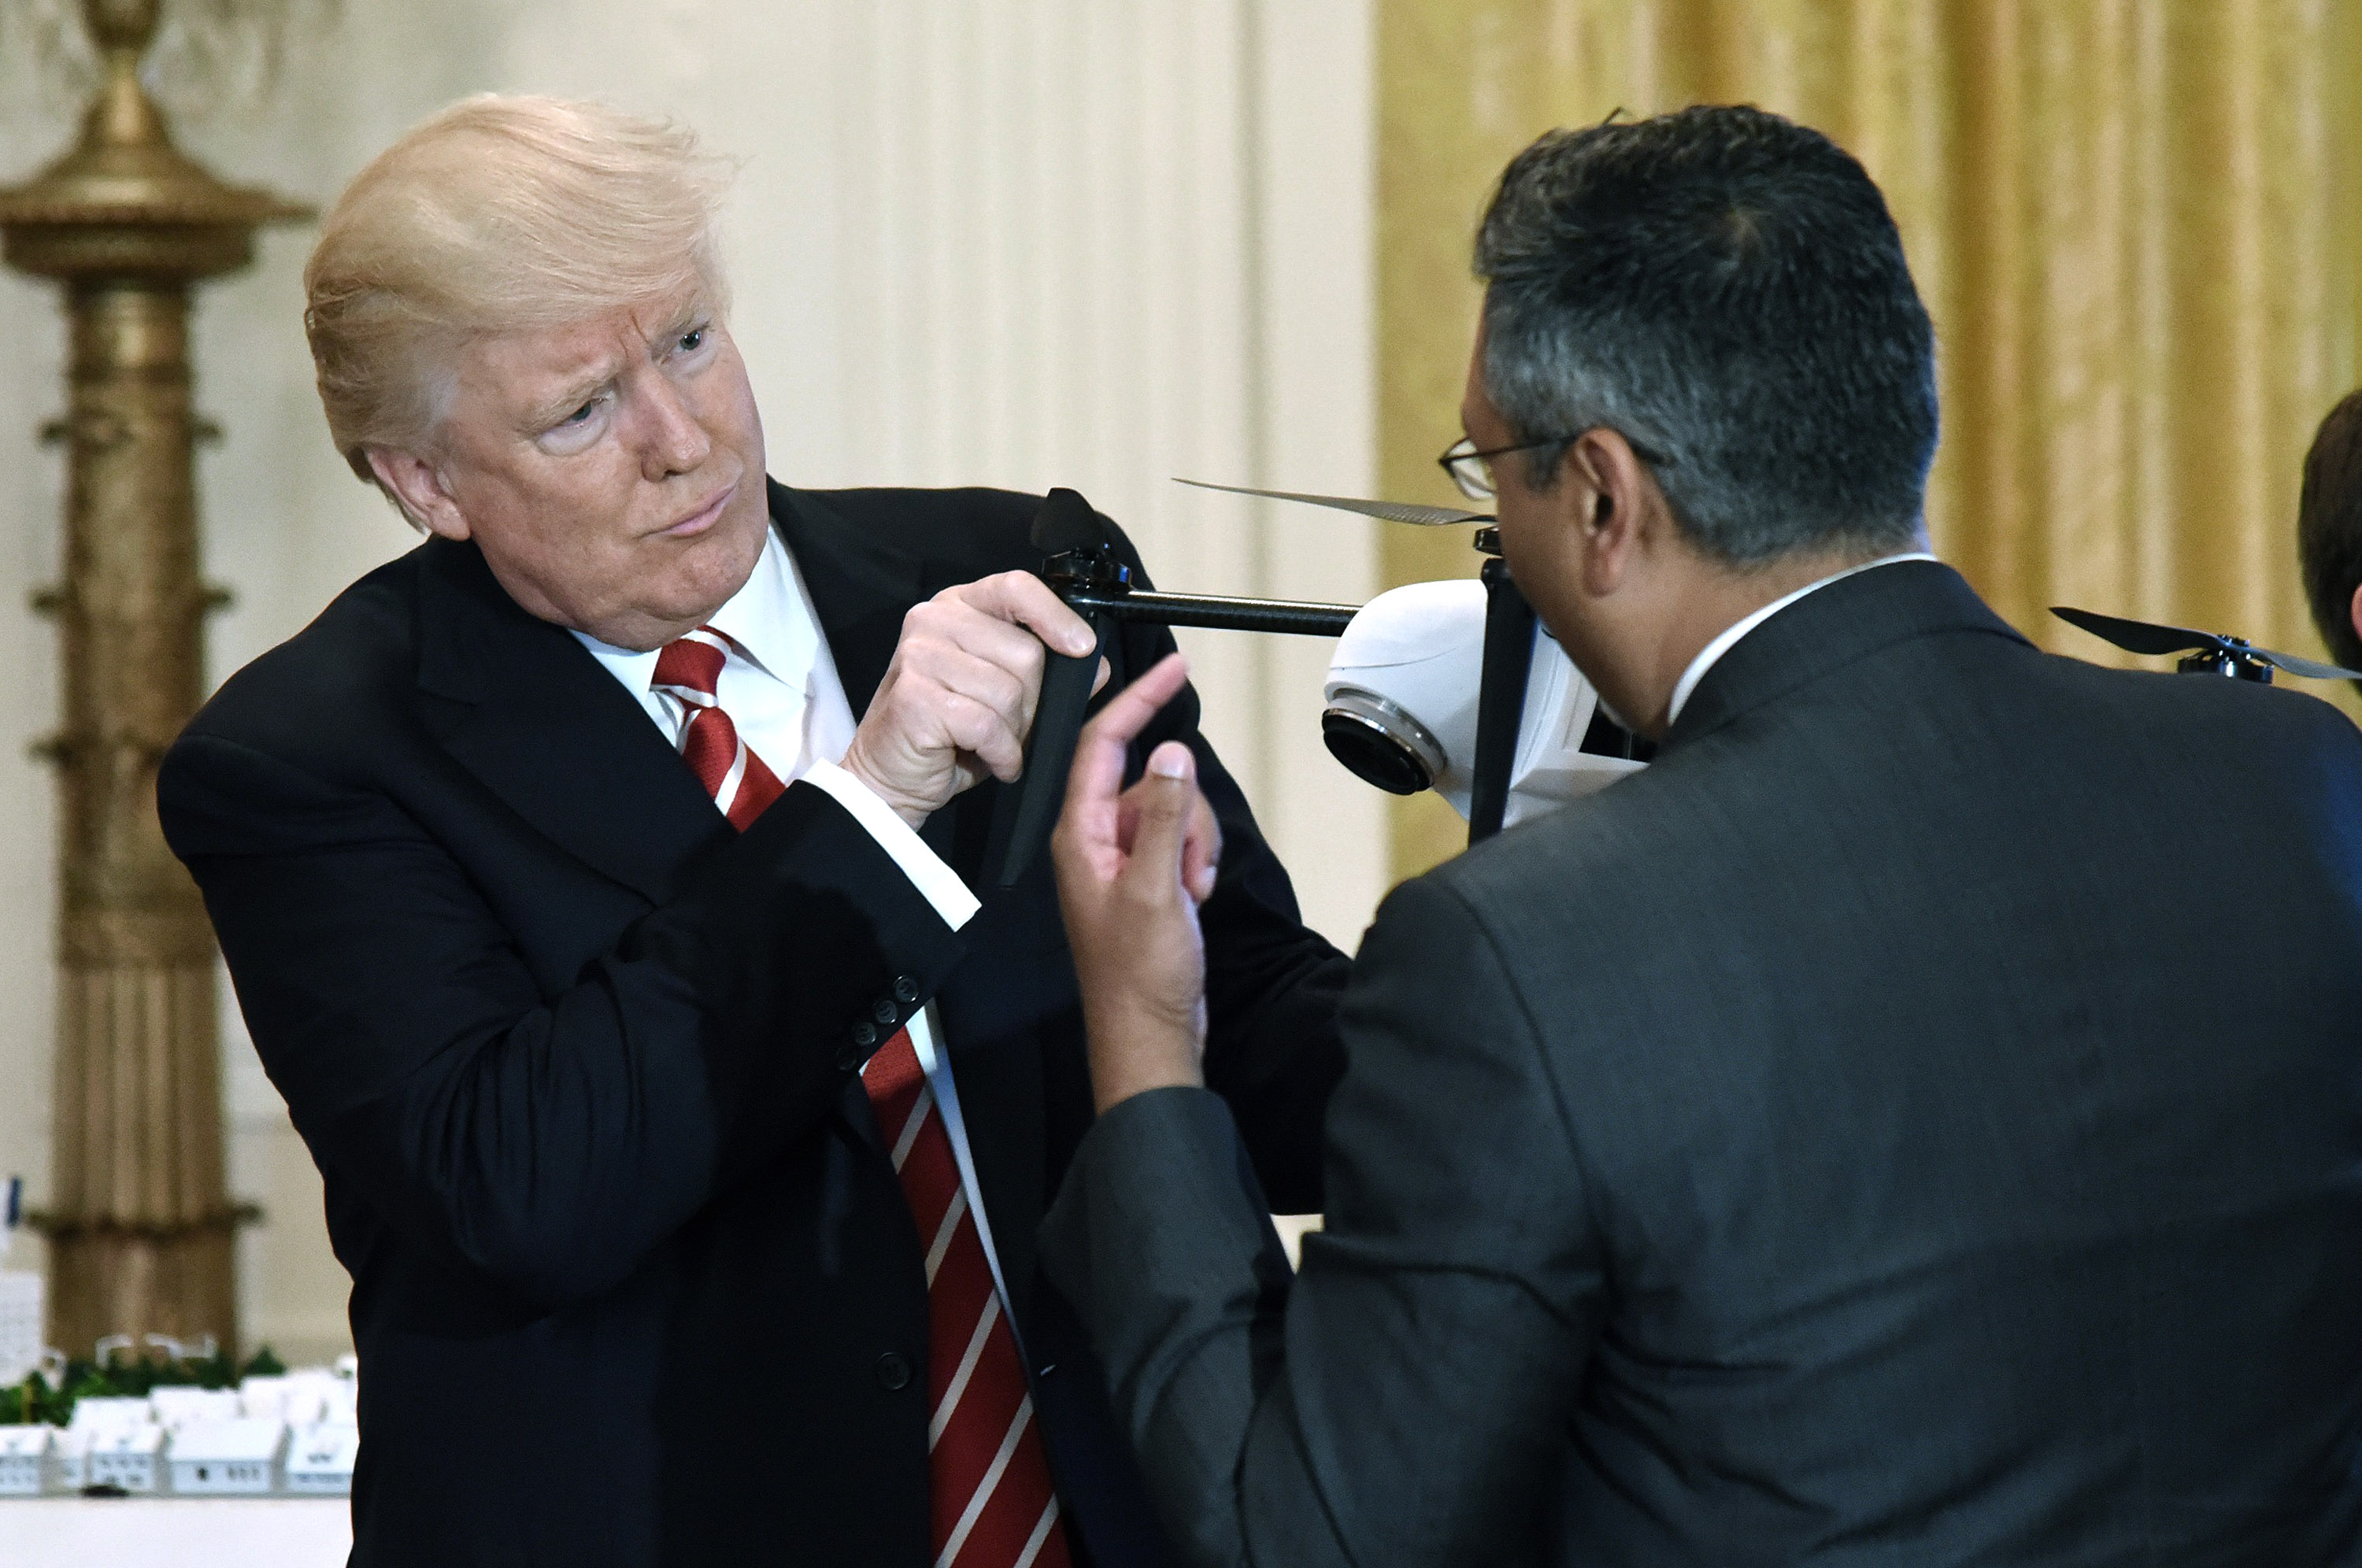 President Donald Trump inspects a drone at the White House.